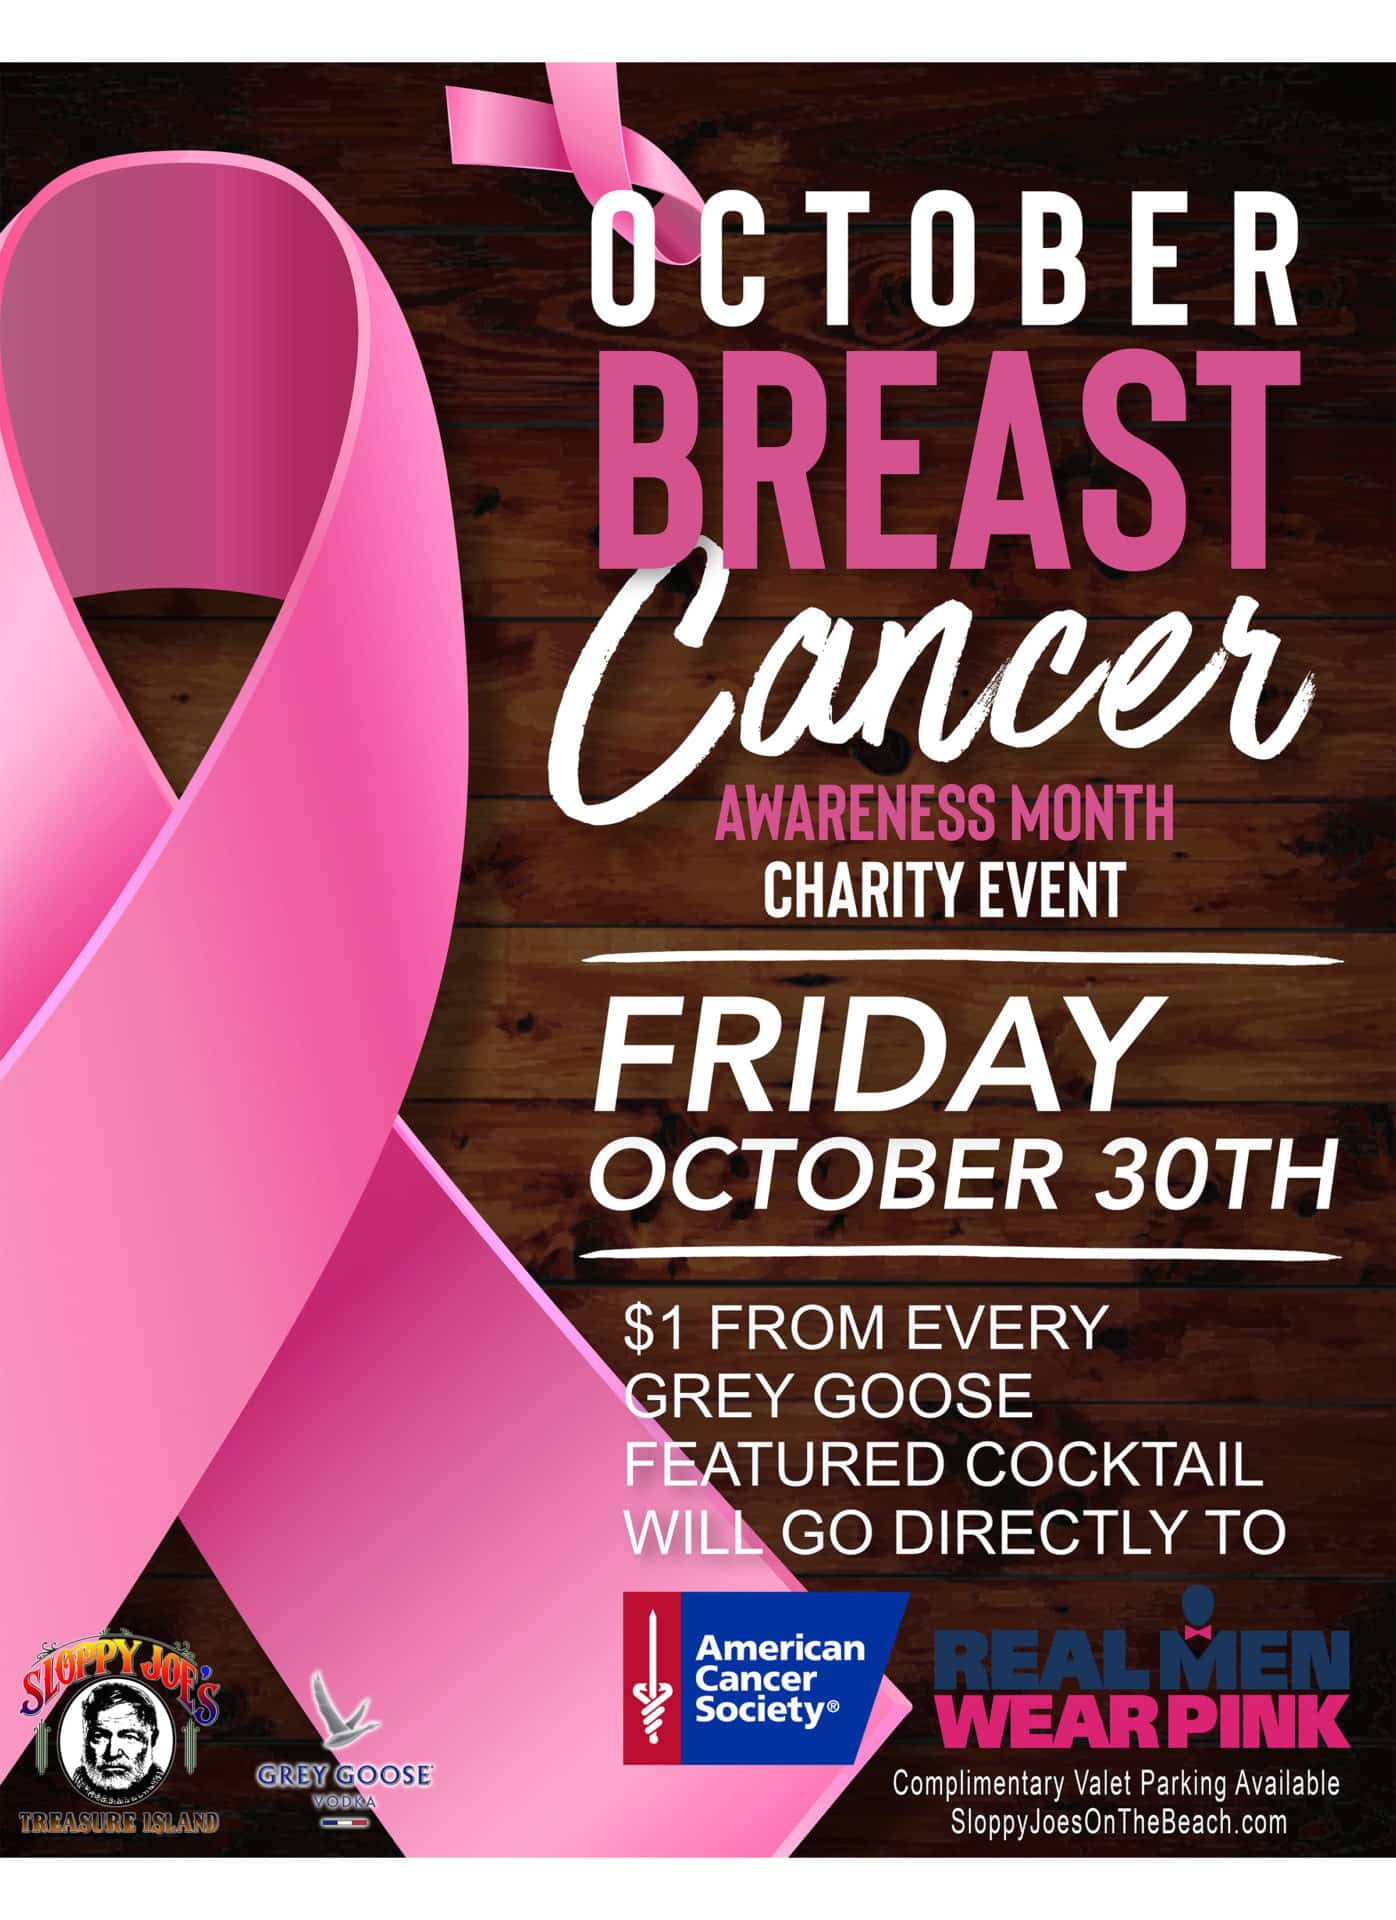 October Breast Cancer Awareness Month Charity Event Sloppy Joe's On